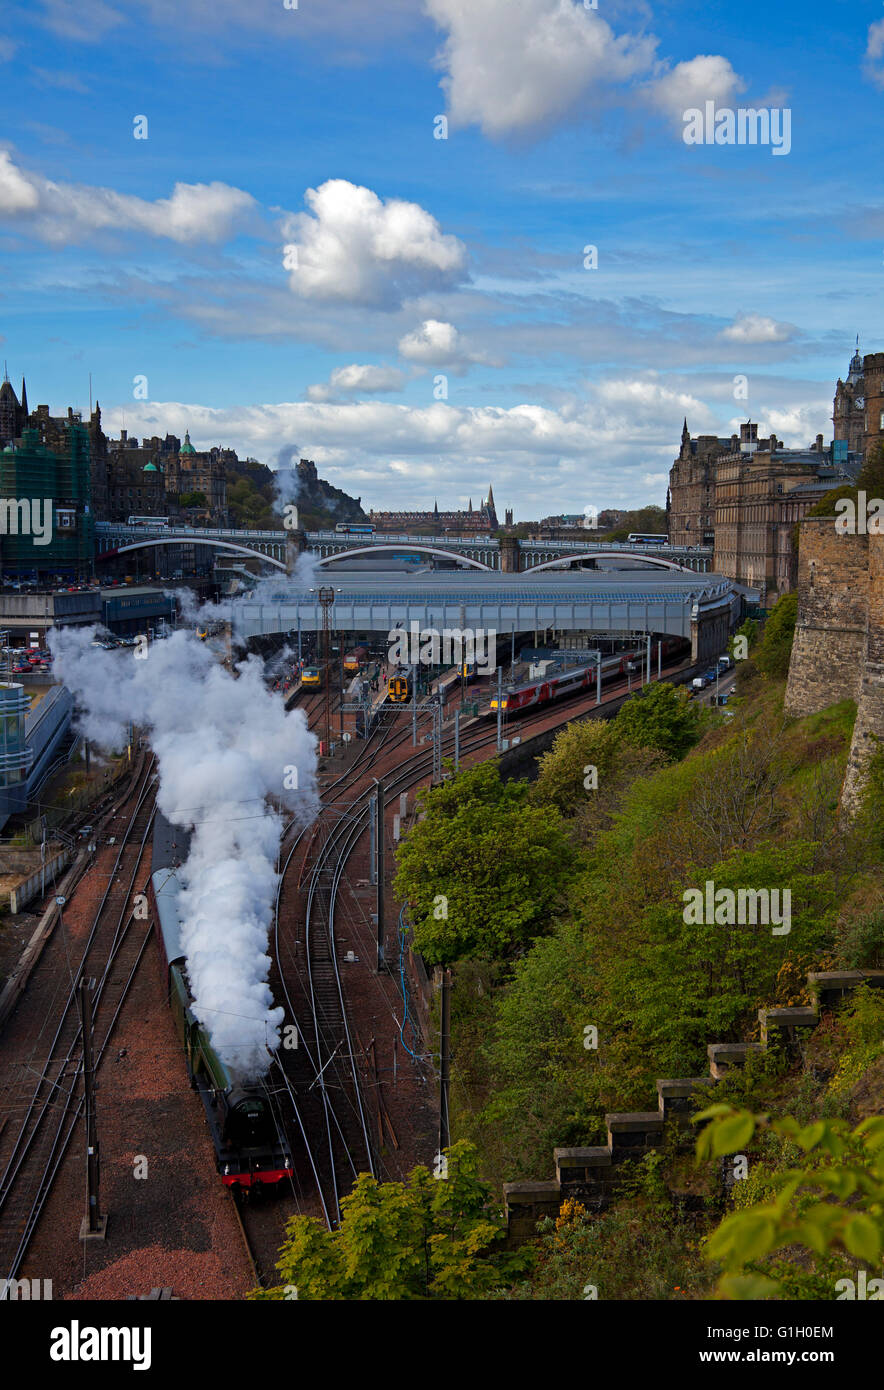 Edinburgh, Scotland, UK, 15 May 2016. The Flying Scotsman locomotive leaves Waverley Station for its day trip to the Scottish Borders on a fine sunny morning. Stock Photo